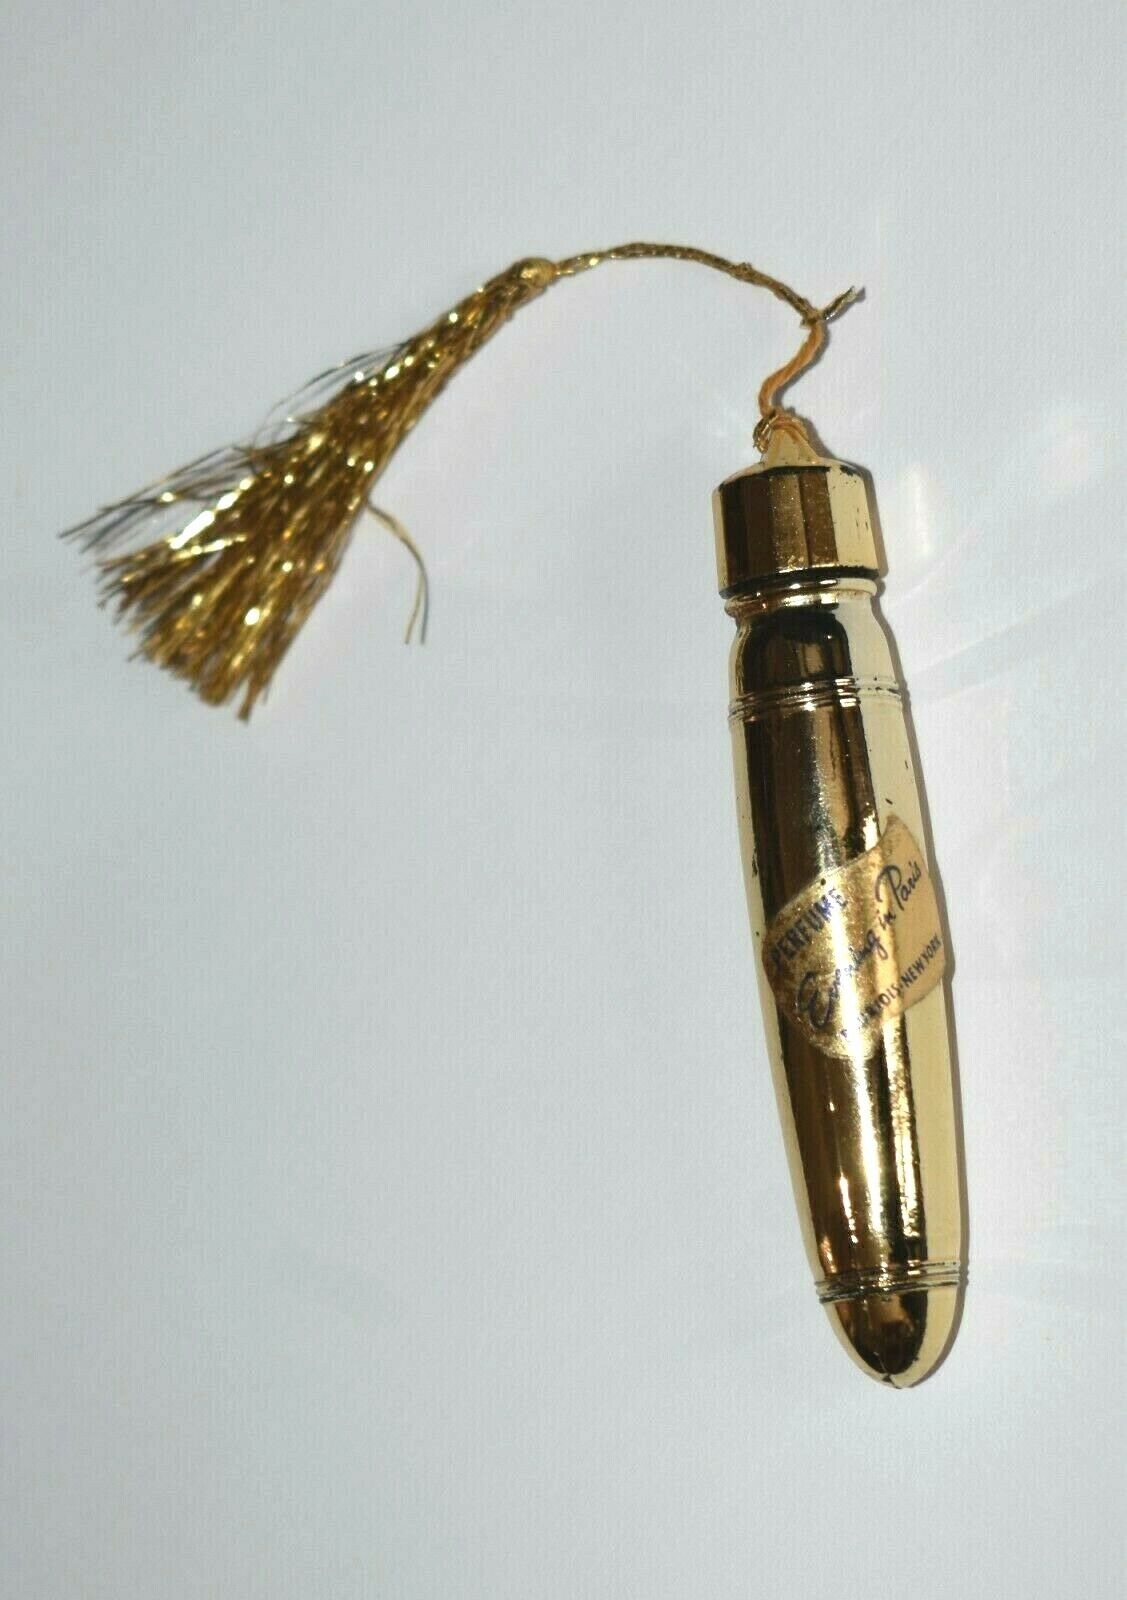 Evening In Paris Perfume Bottle with Label Gold Plated Glass Tassel Vial Vintage